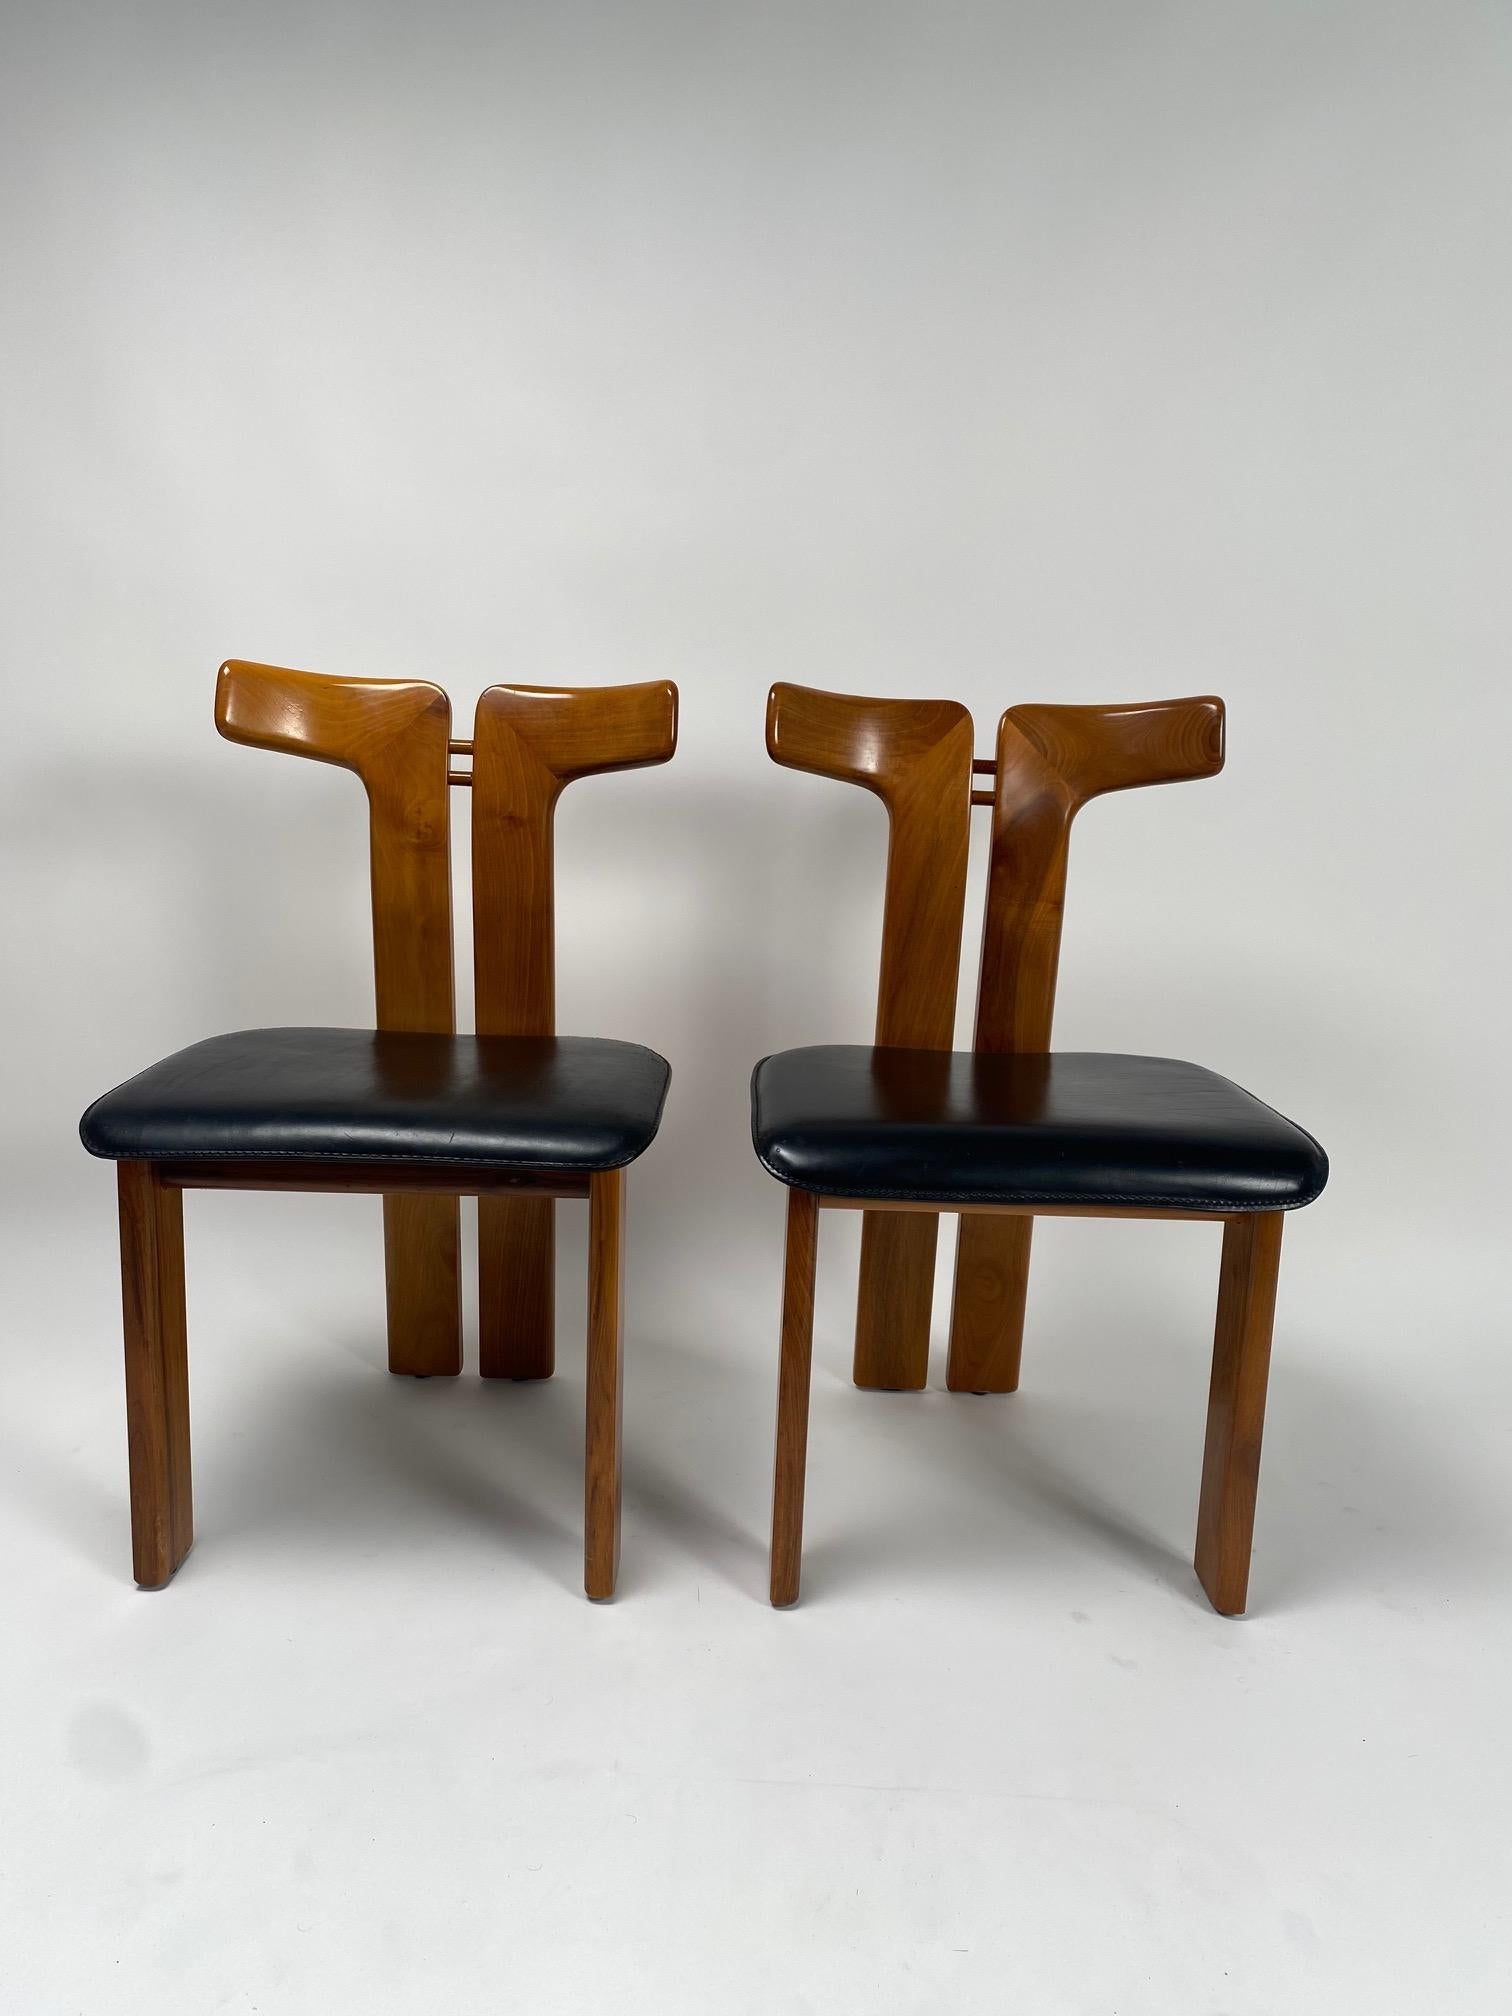 Pierre Cardin, 6 Dining Chairs in Walnut and Leather, 1970s For Sale 3